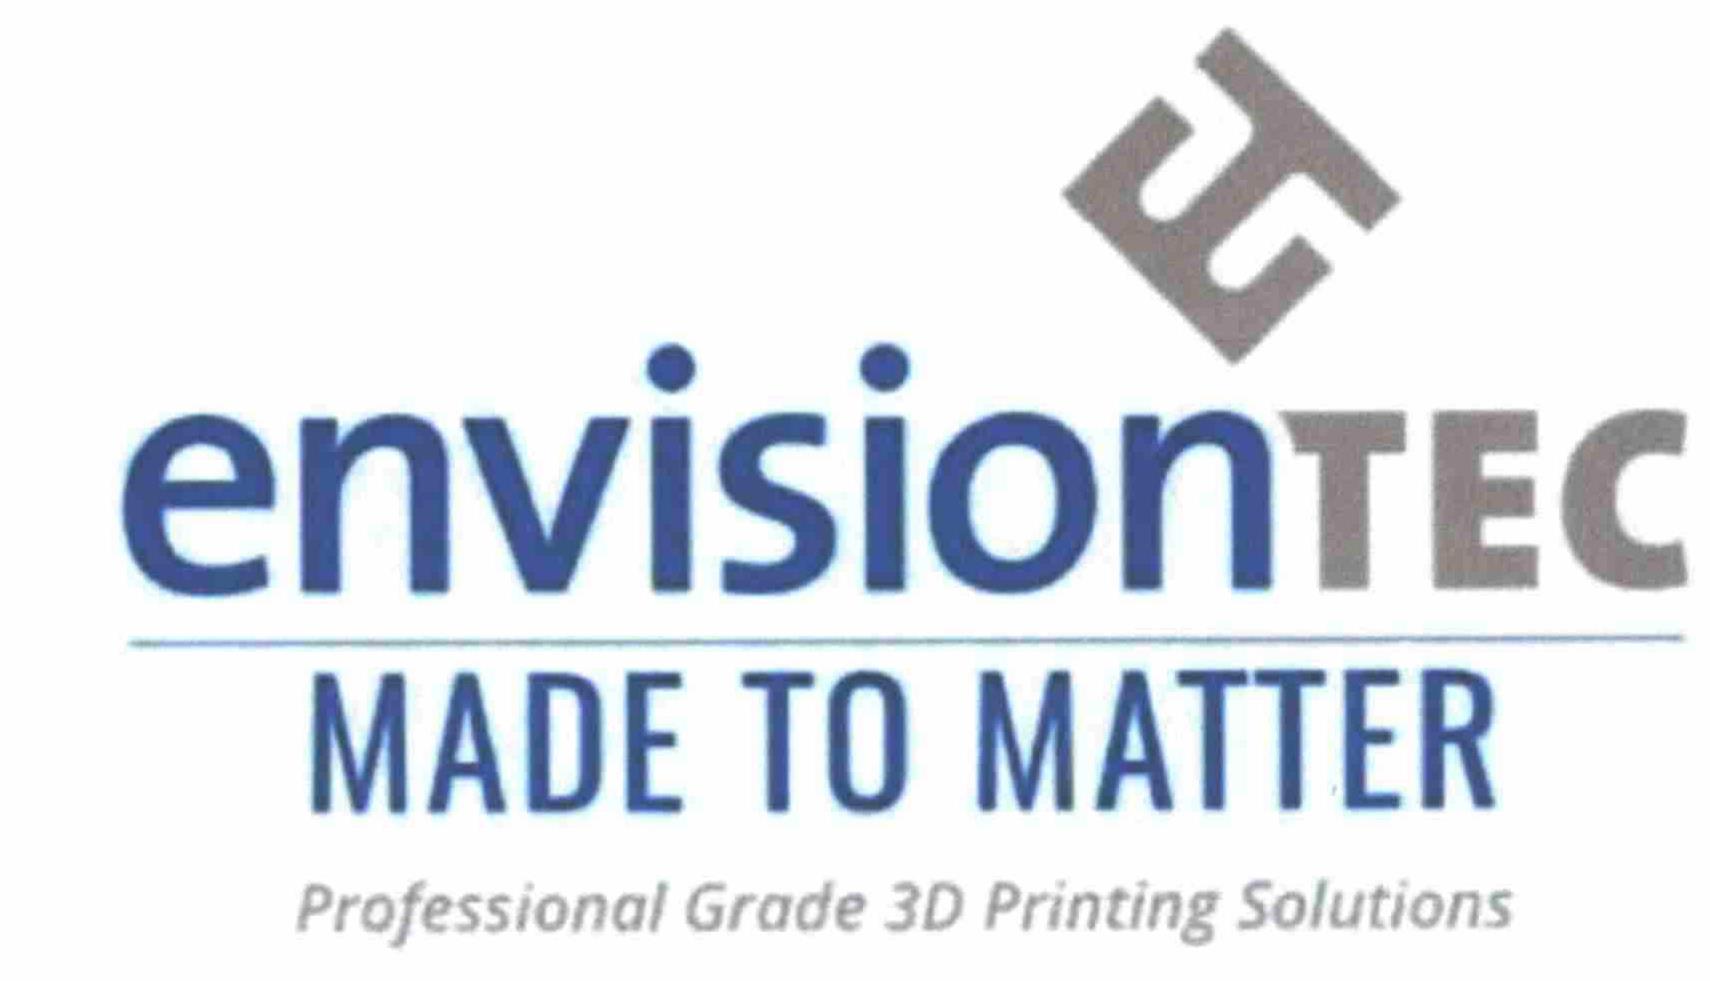 Trademark Logo ET ENVISIONTEC MADE TO MATTER PROFESSIONAL GRADE 3D PRINTING SOLUTIONS